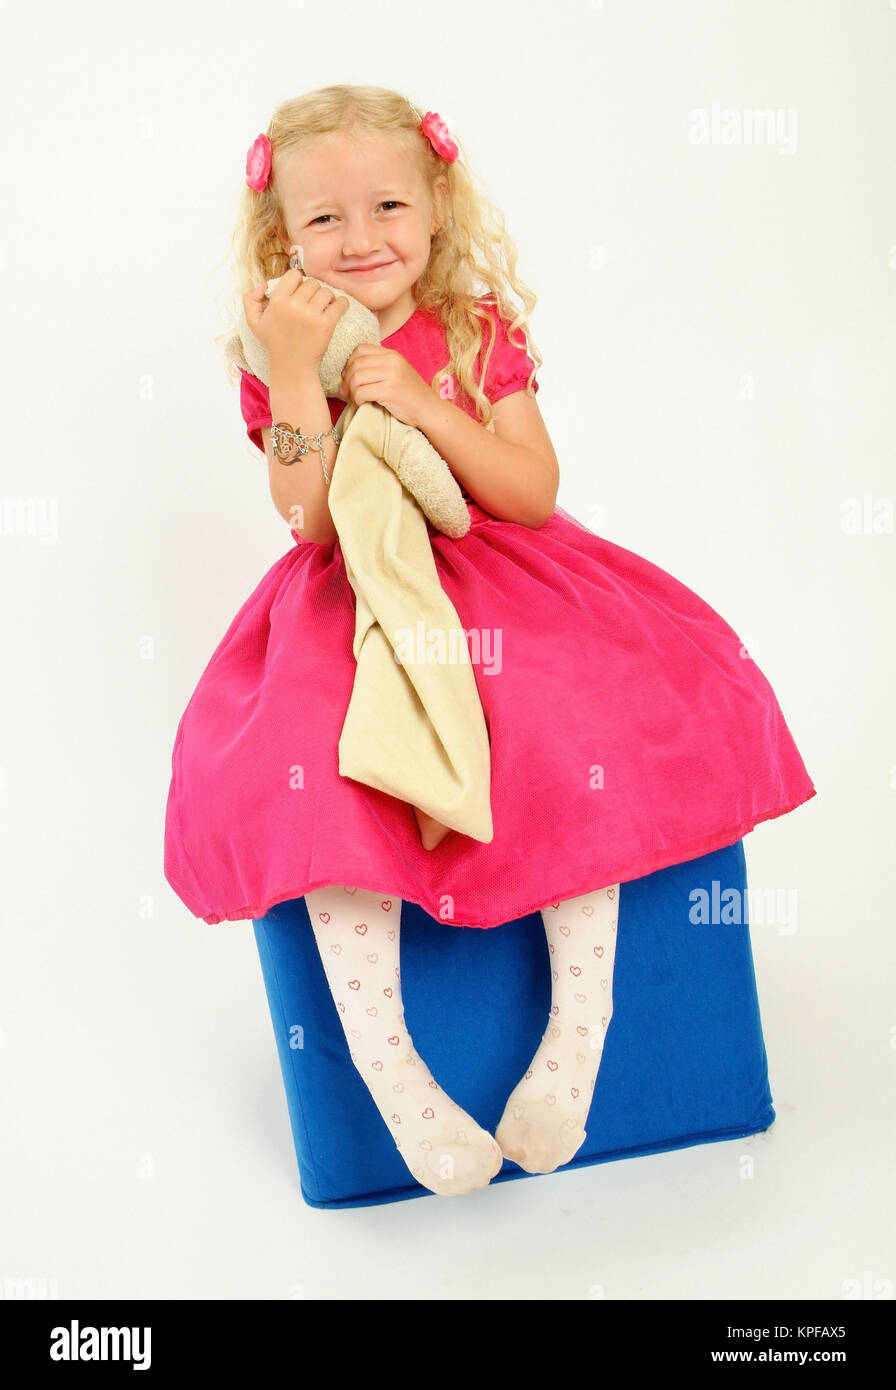 Maedchen, 5 Jahre, mit Stofftier - girl, 5 years old, with toy Stock Photo